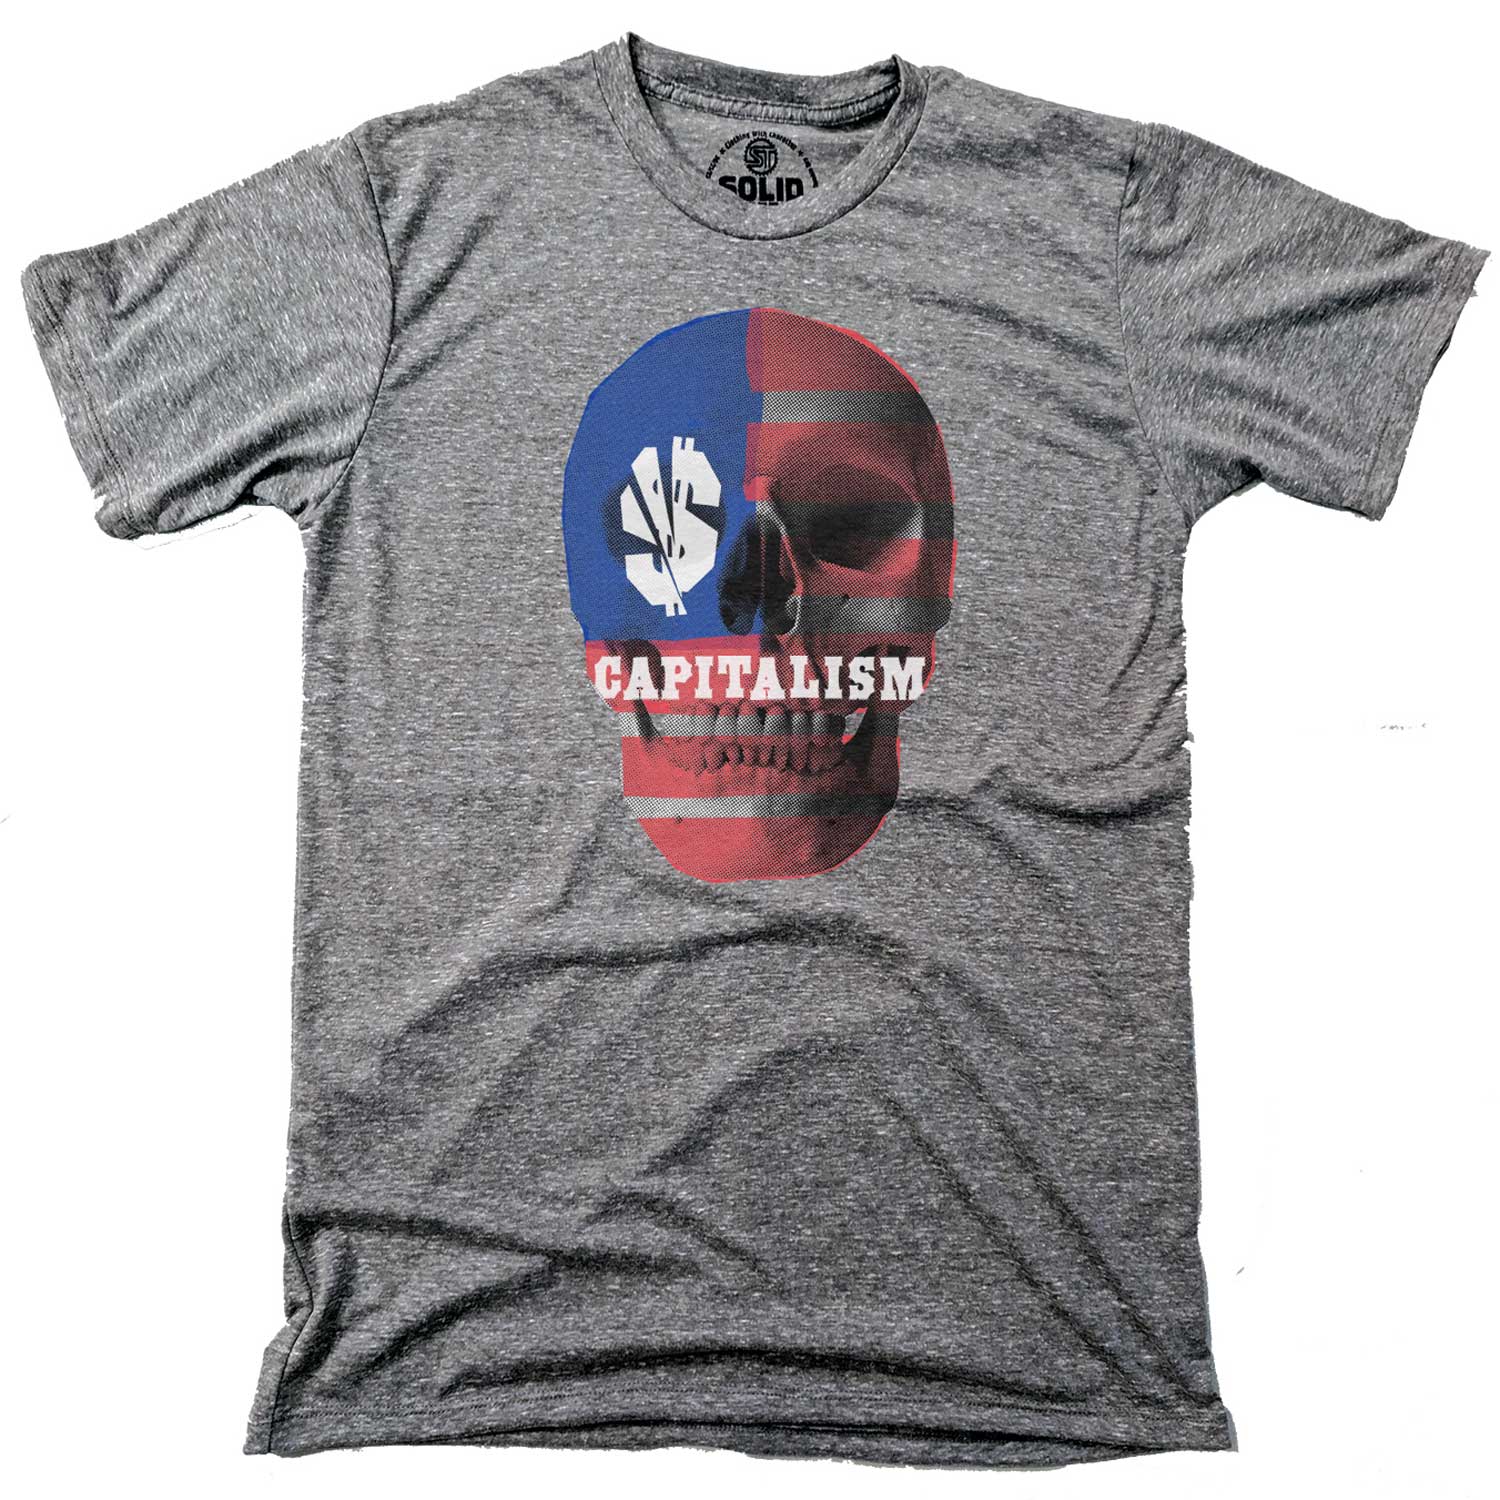 Men's Capitalism Skull Vintage Activist T-shirt | Cool Income Equality Triblend Graphic Tee | Solid Threads